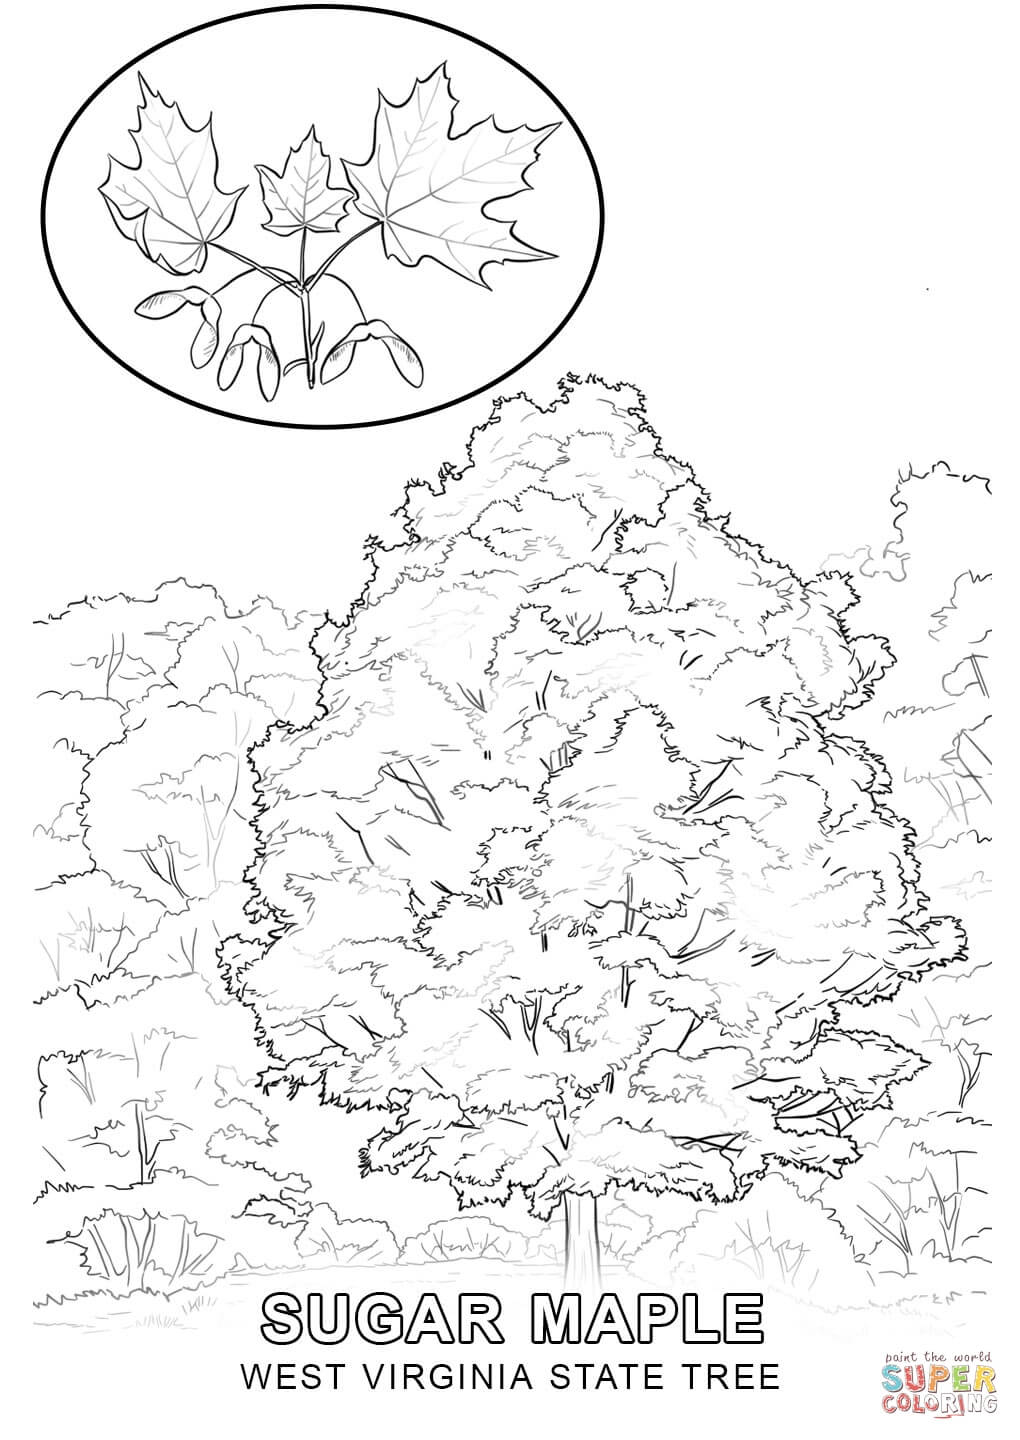 West Virginia State Tree coloring page | Free Printable Coloring Pages